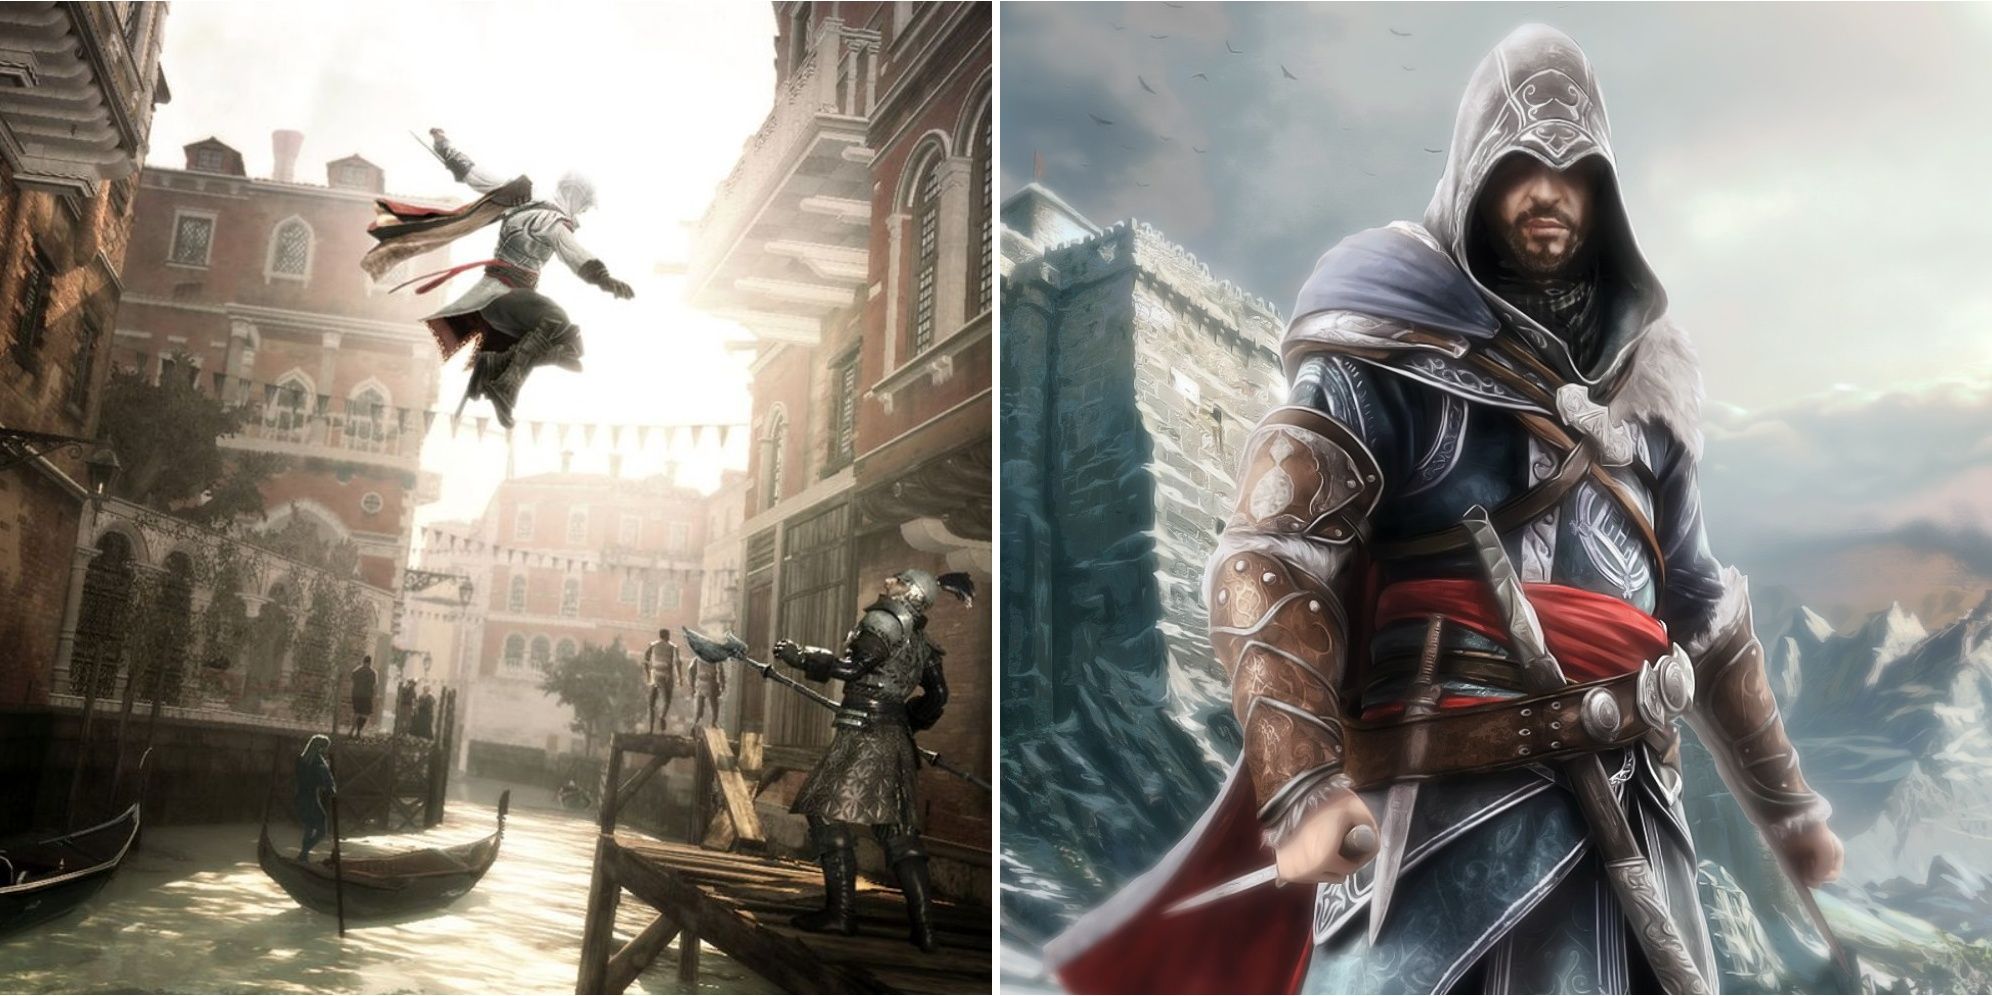 left: young Ezio jumping over Venice canal; right: old Ezio standing by mountains